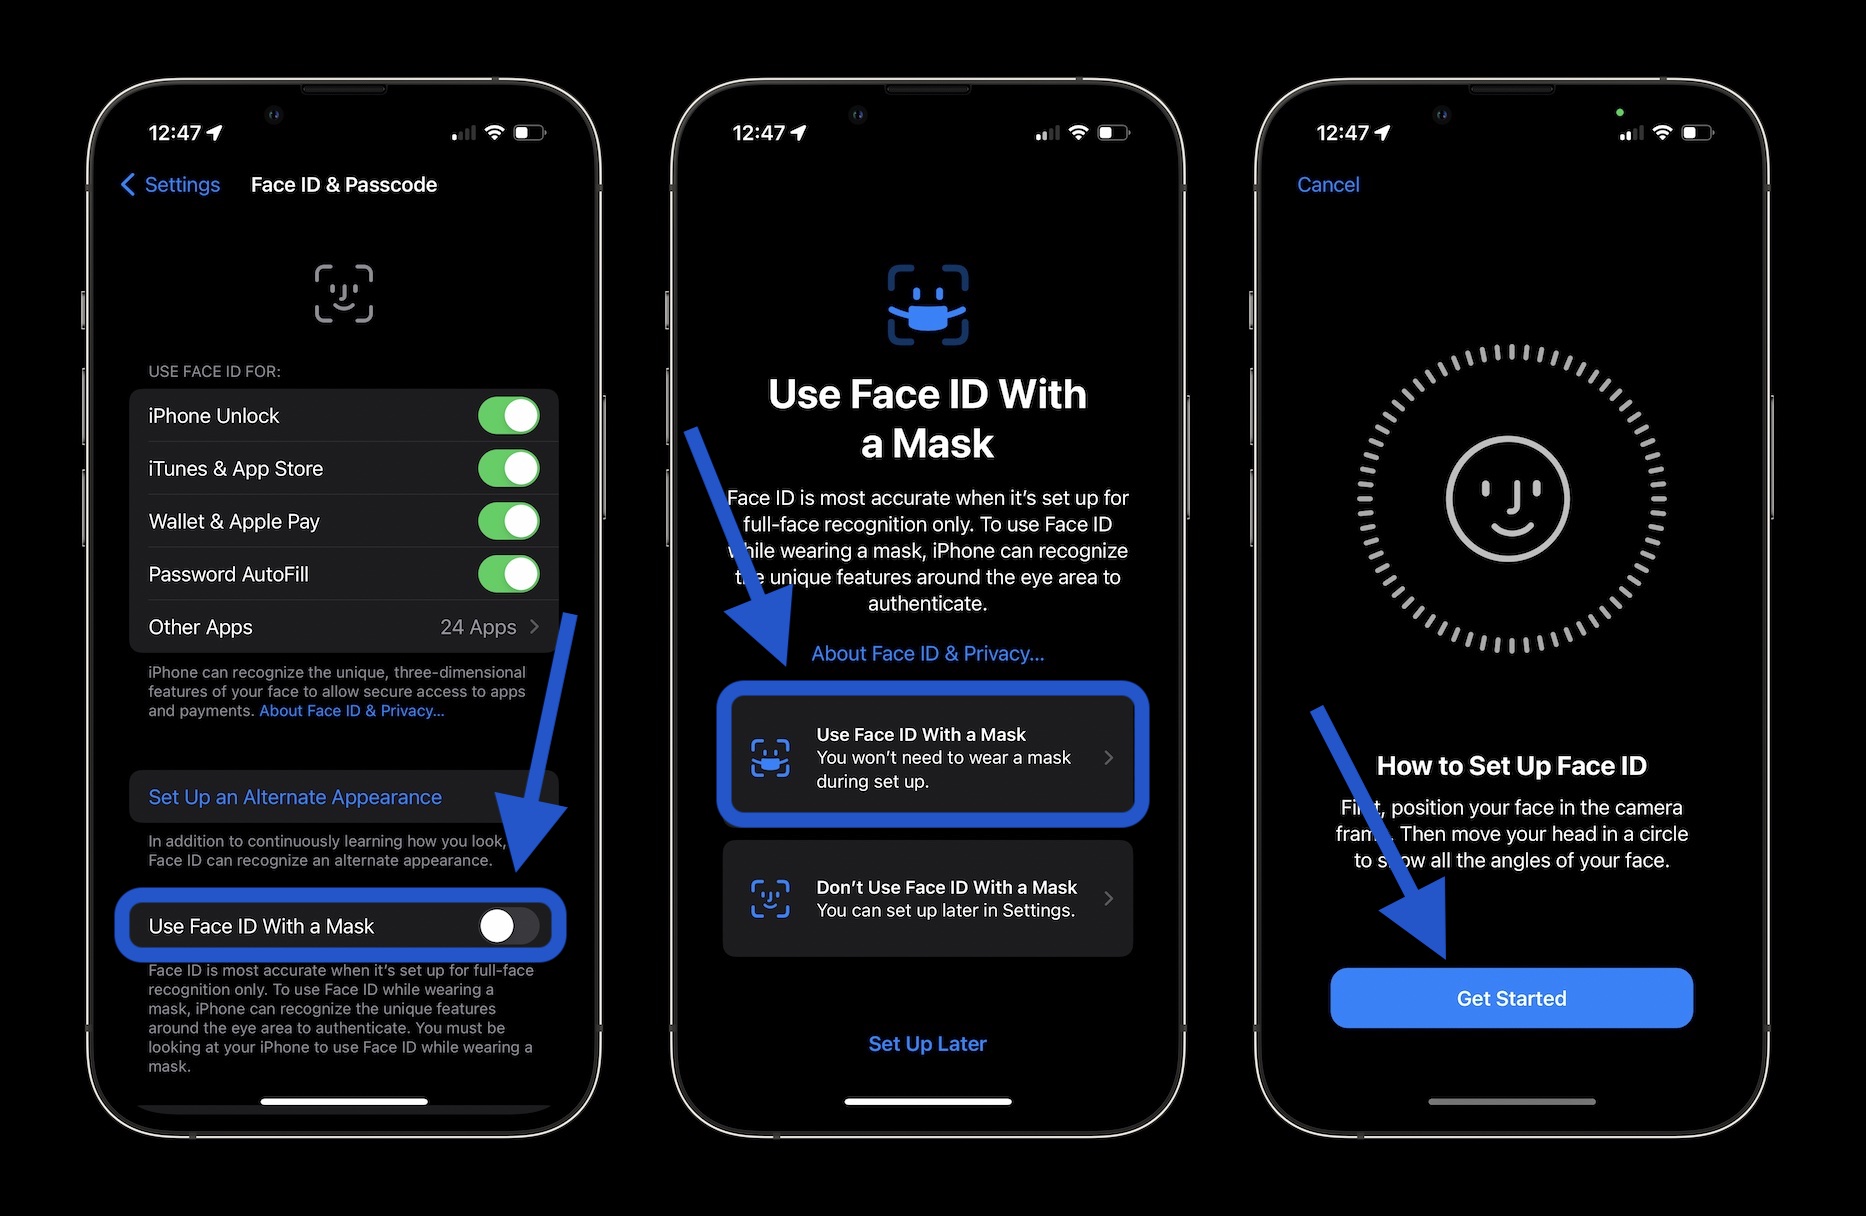 How to use iPhone Face ID With a Mask in iOS 15.4 walkthrough 1